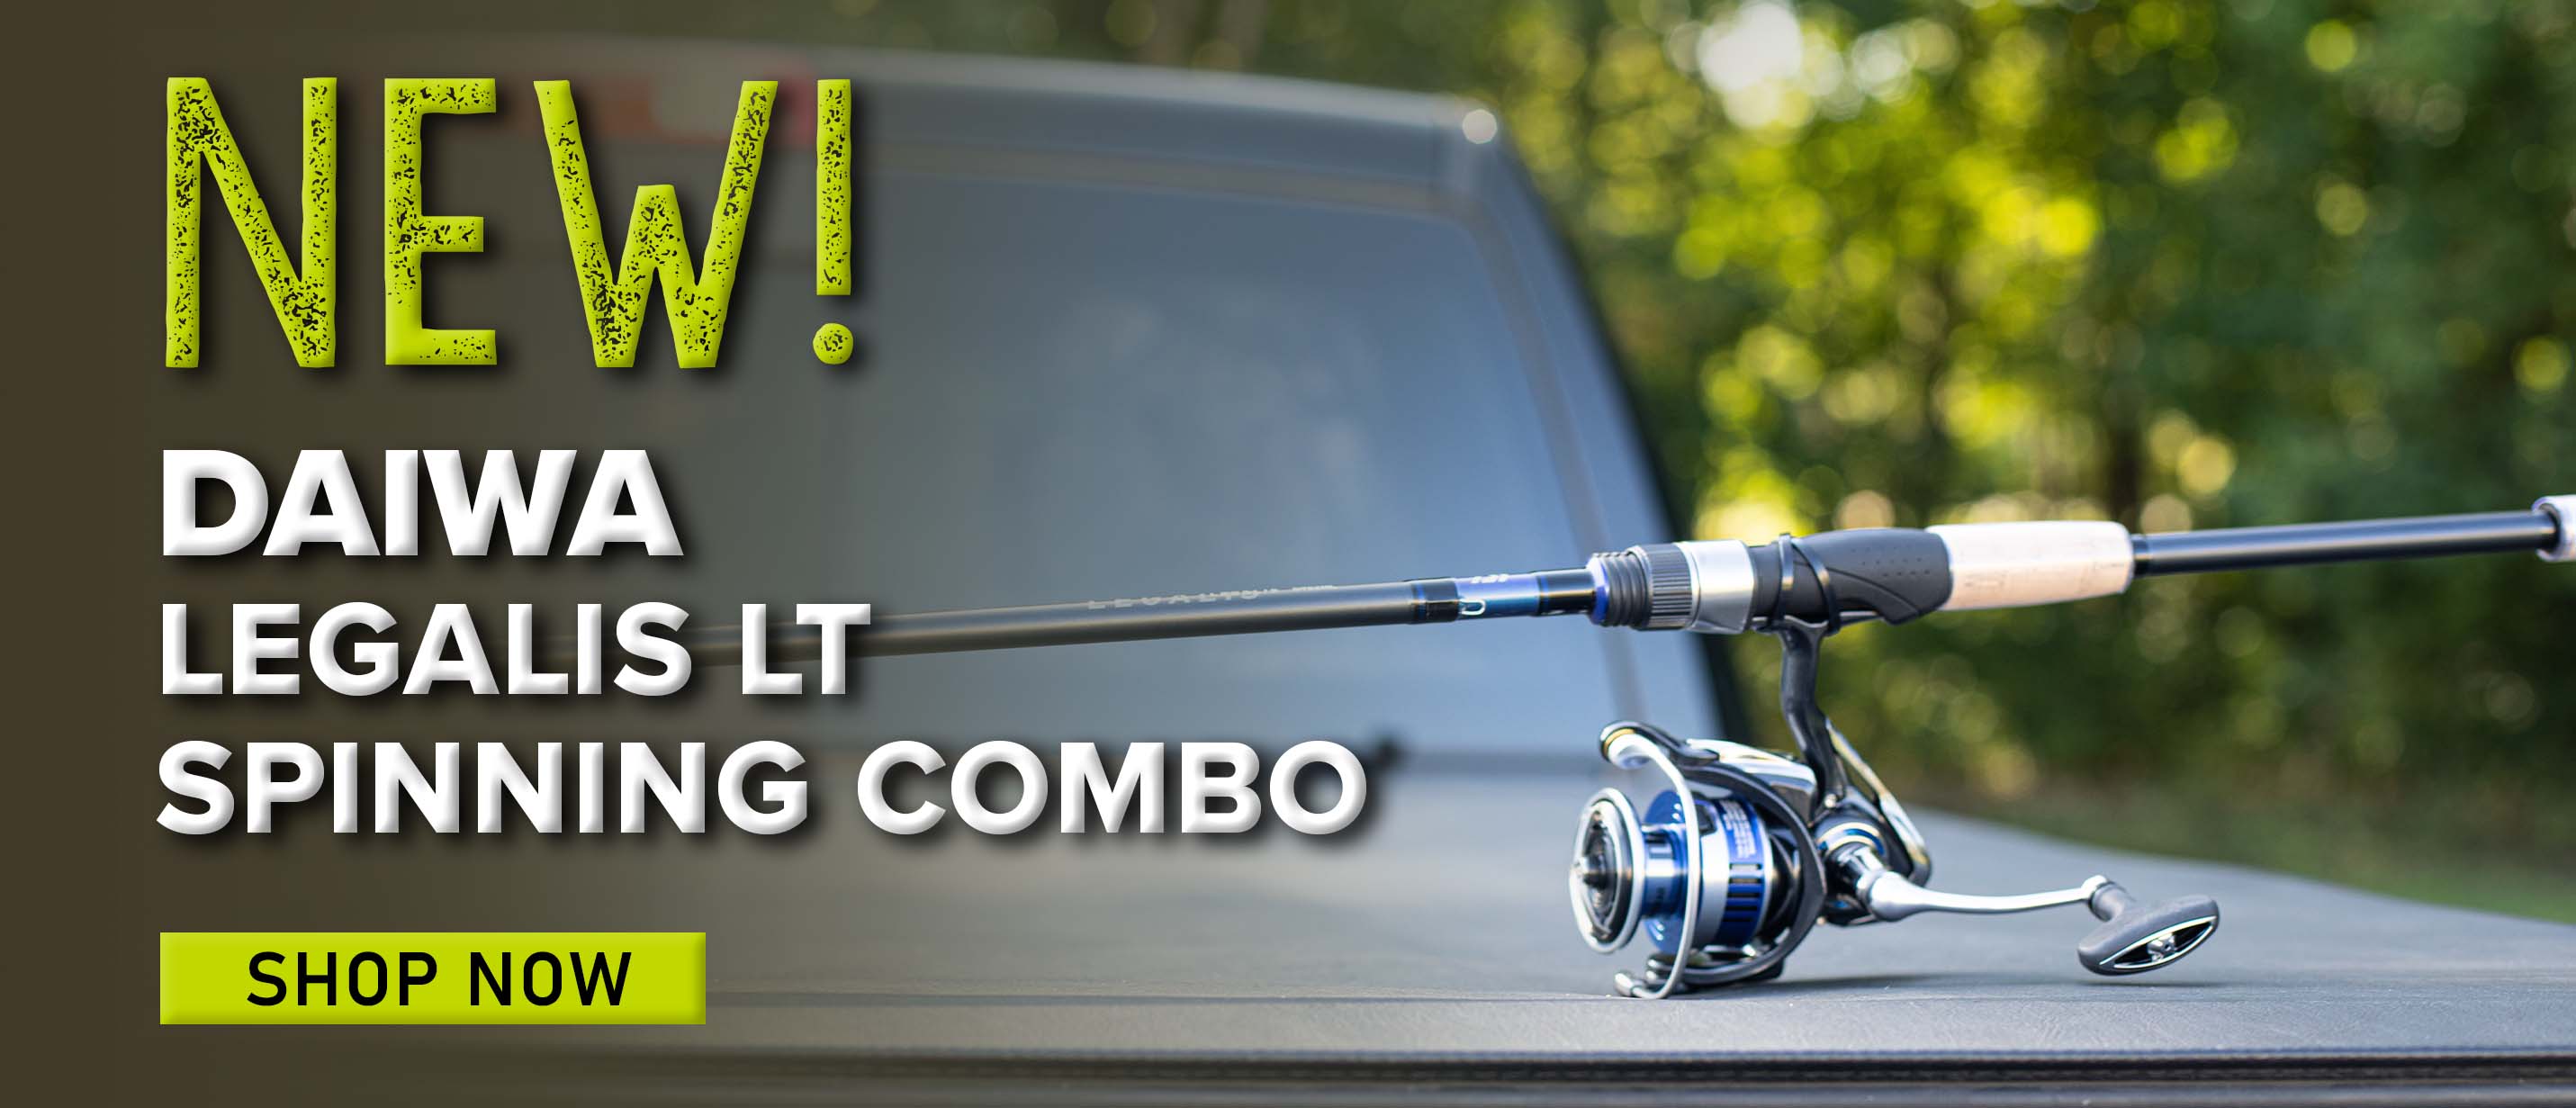 New! Daiwa Legalis LT Spinning Combo Shop Now